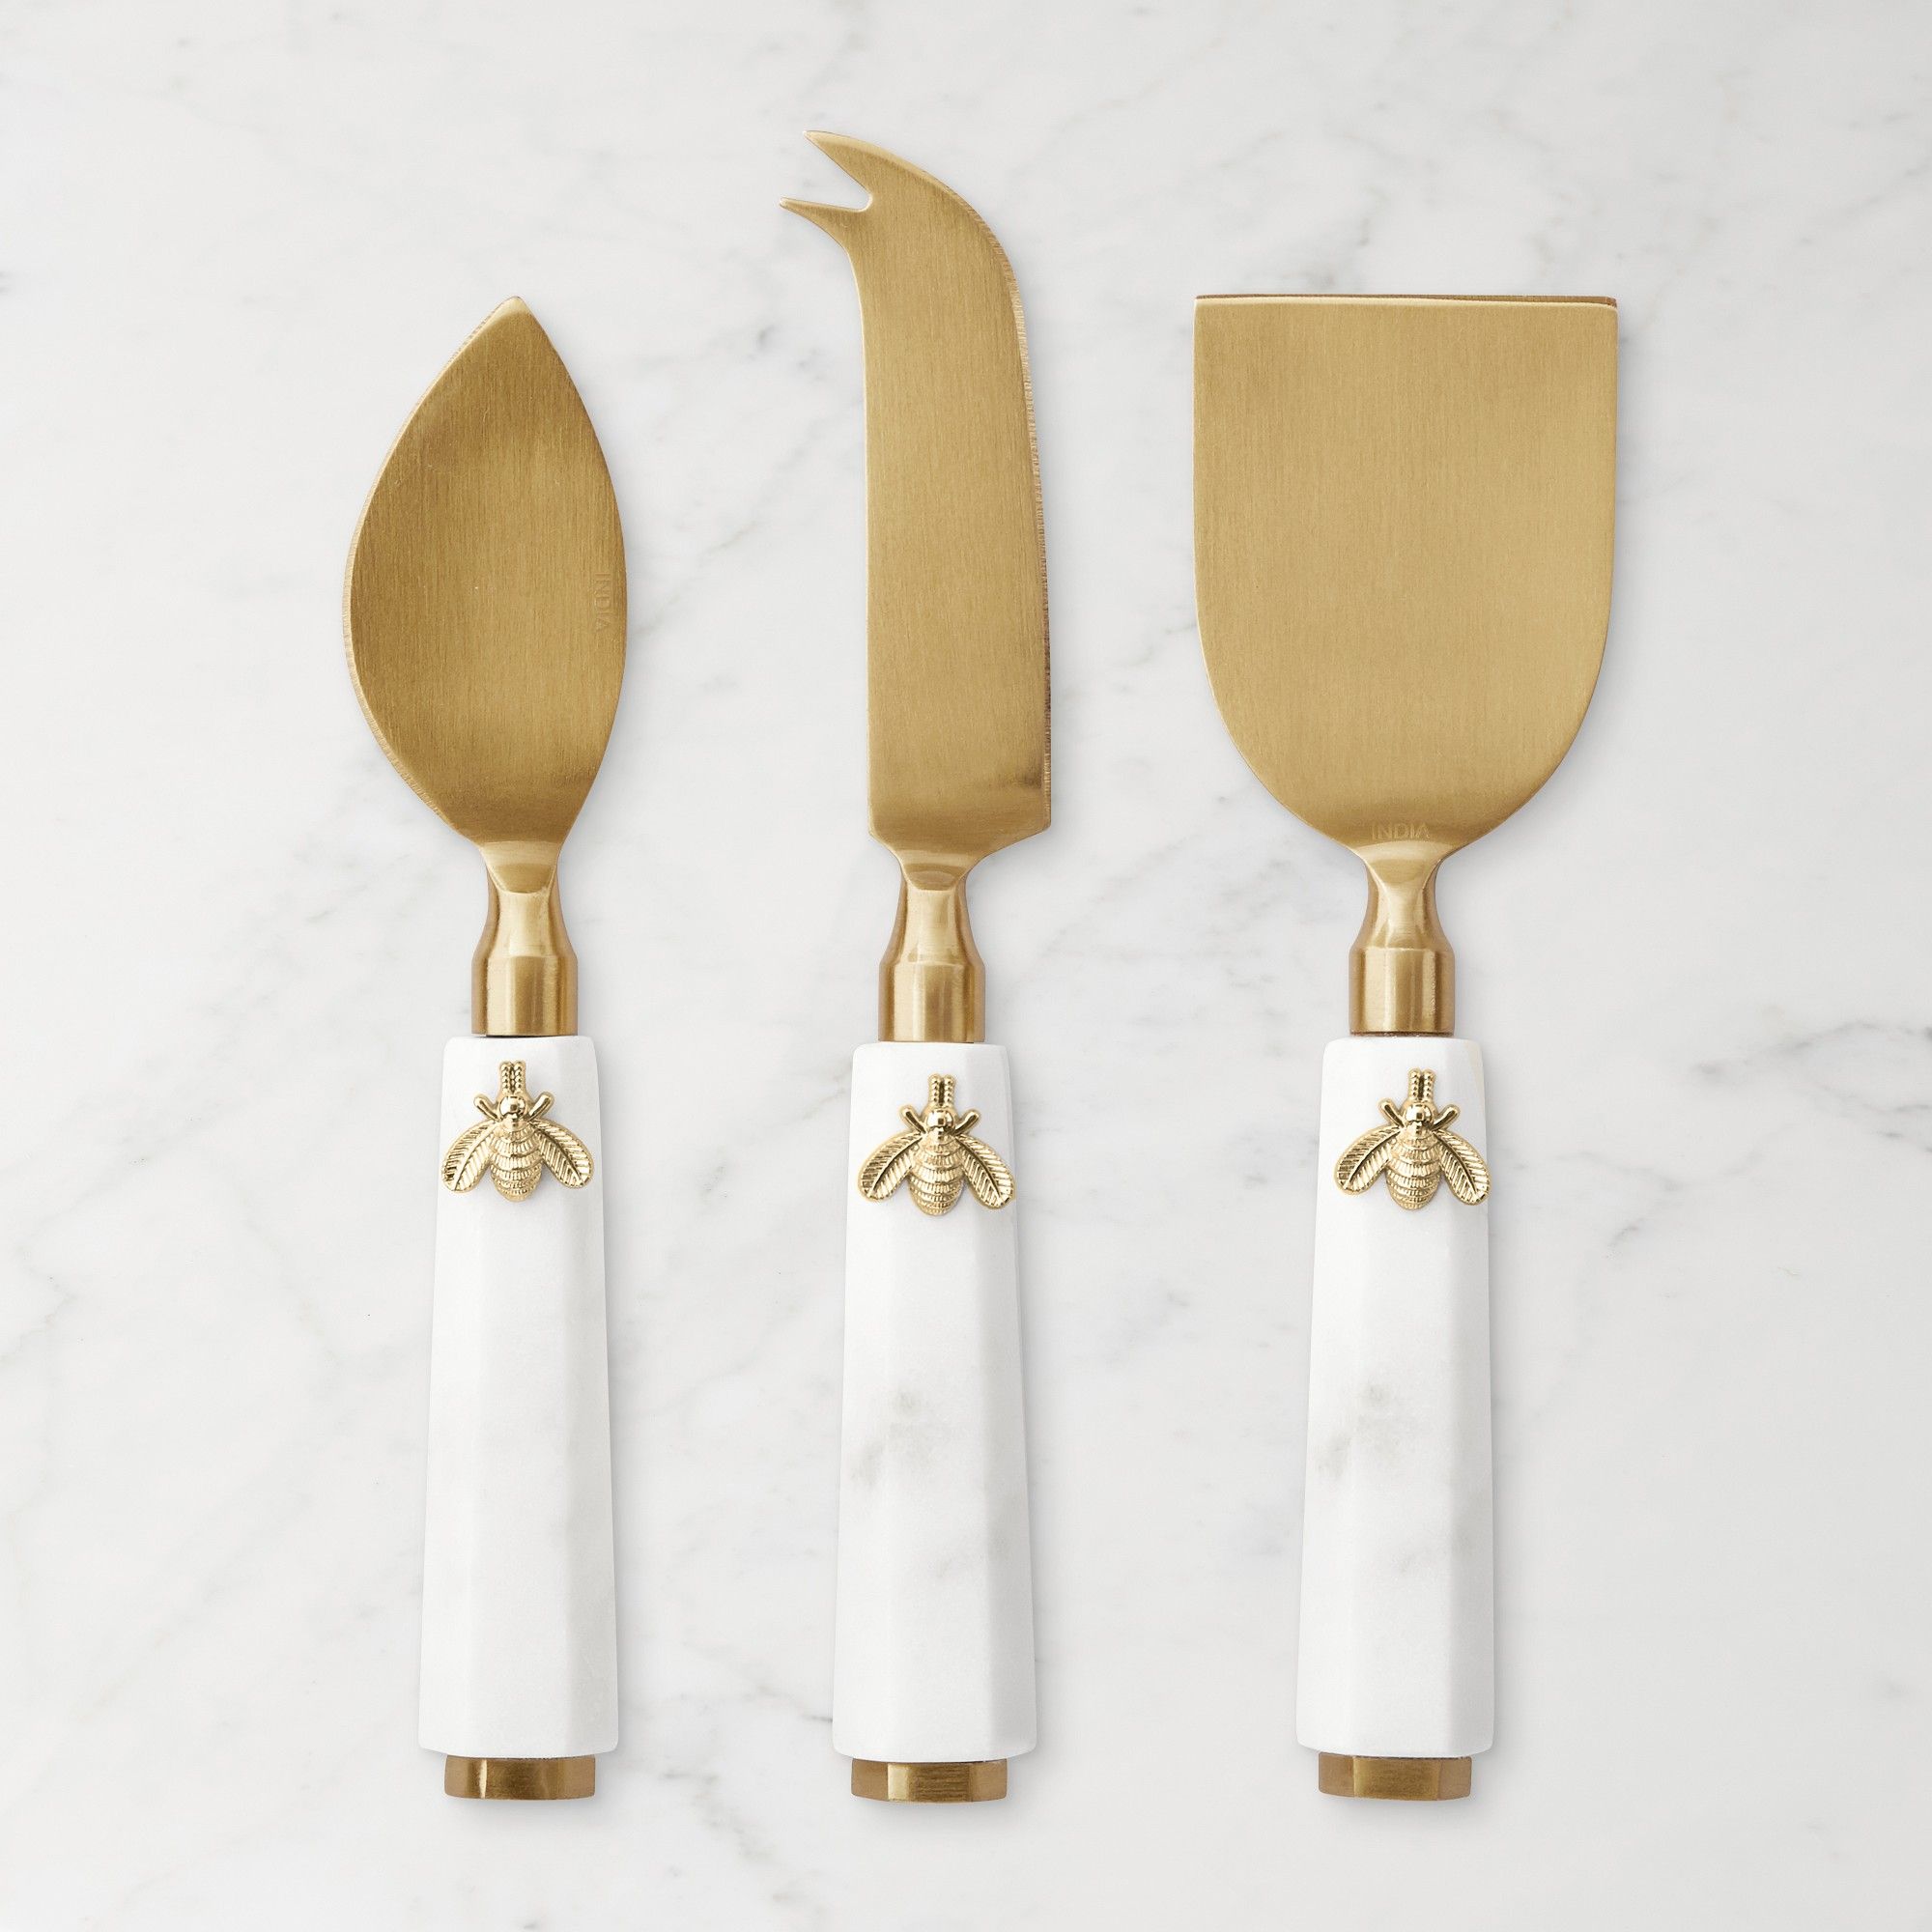 Bestseller   Marble Honeycomb Cheese Knives, Set of 3   Only at Williams Sonoma       $54.95 | Williams-Sonoma